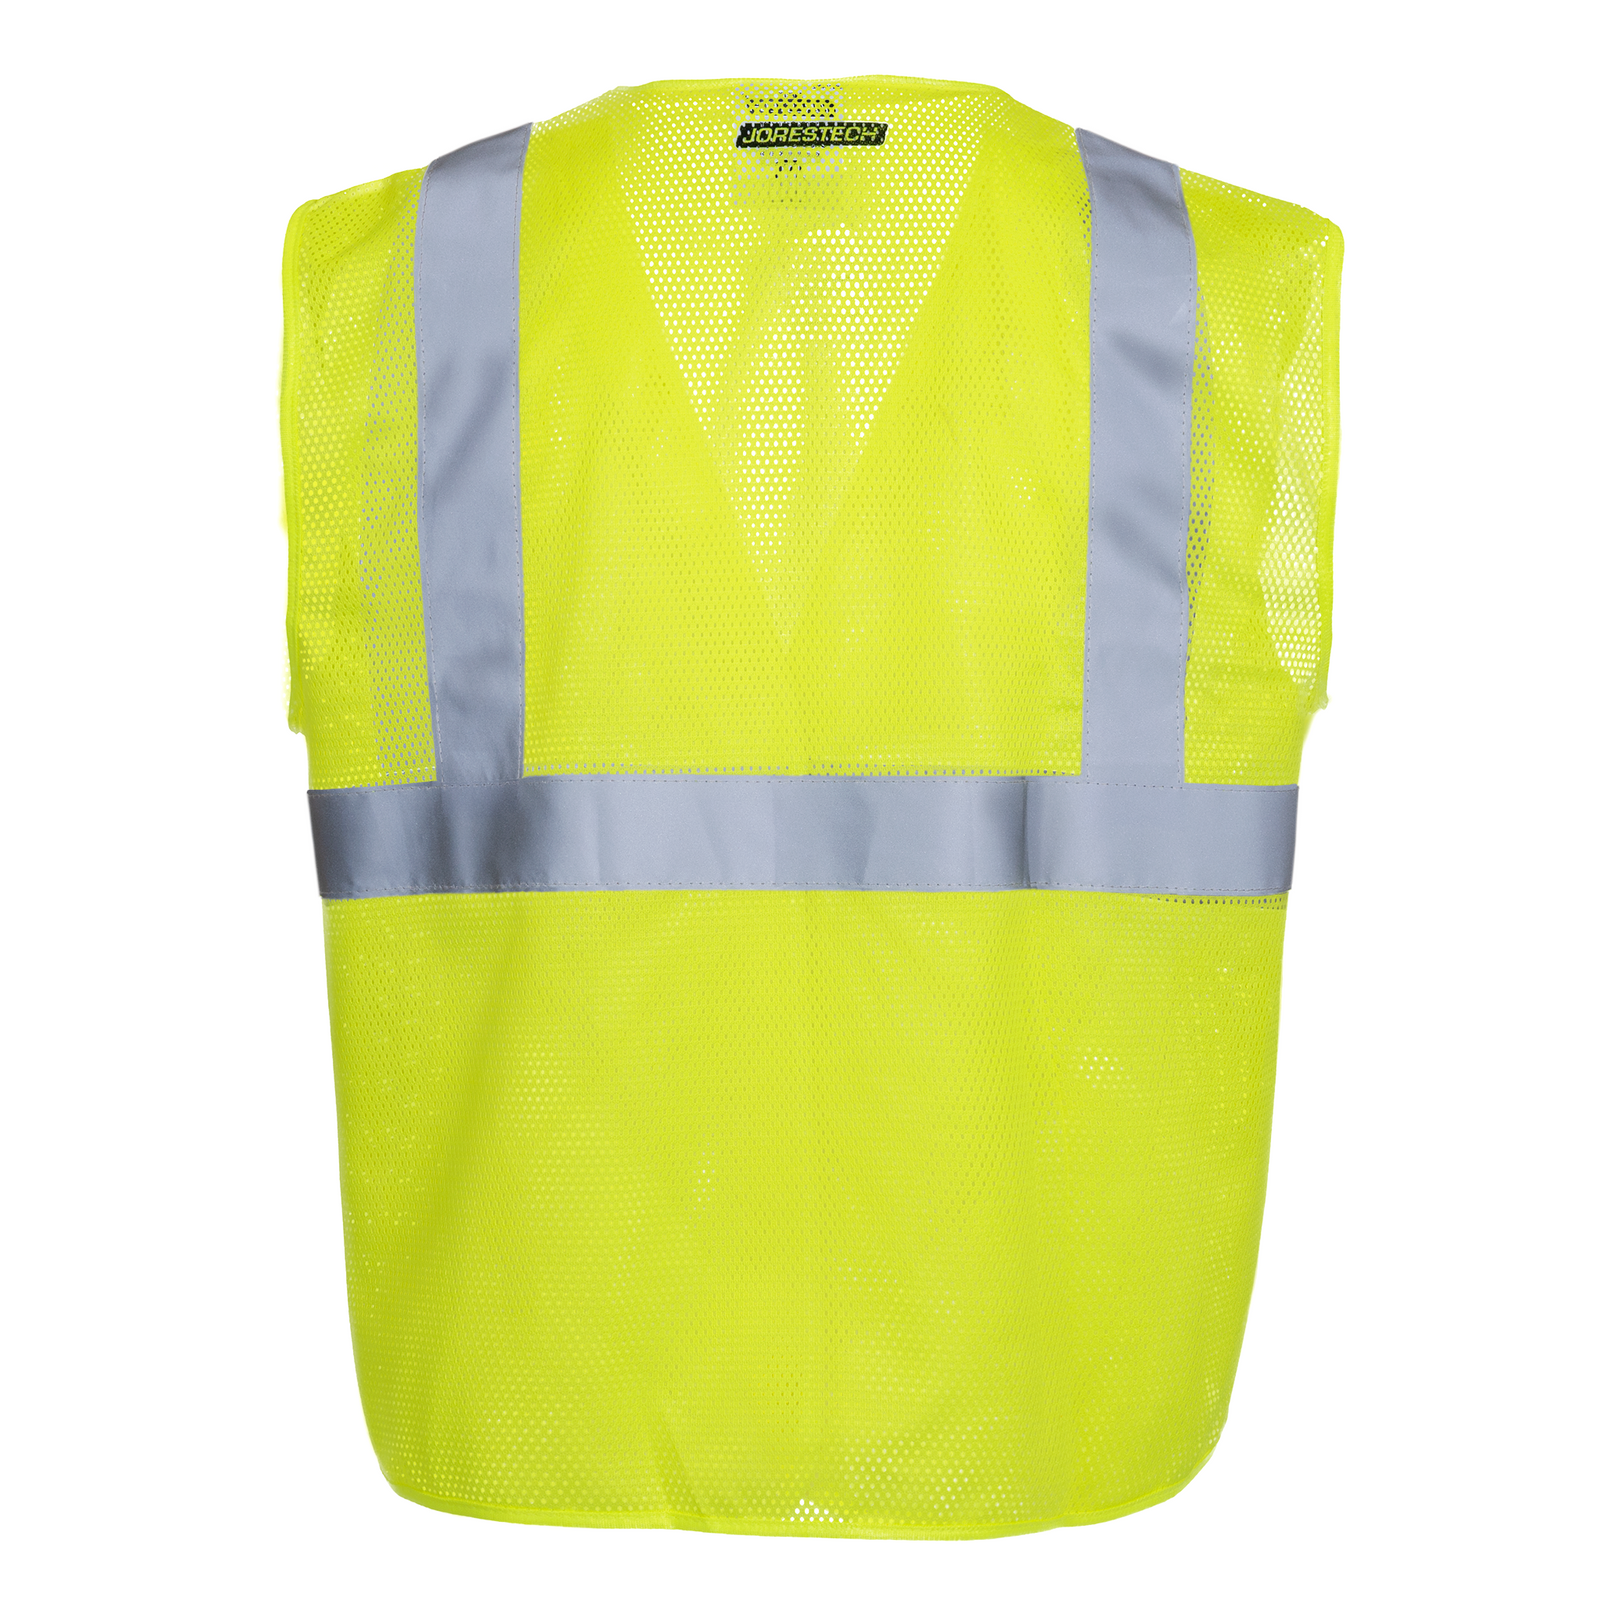 Back view of the Hi vis mesh safety vest with 2 inches reflective strips and pocket